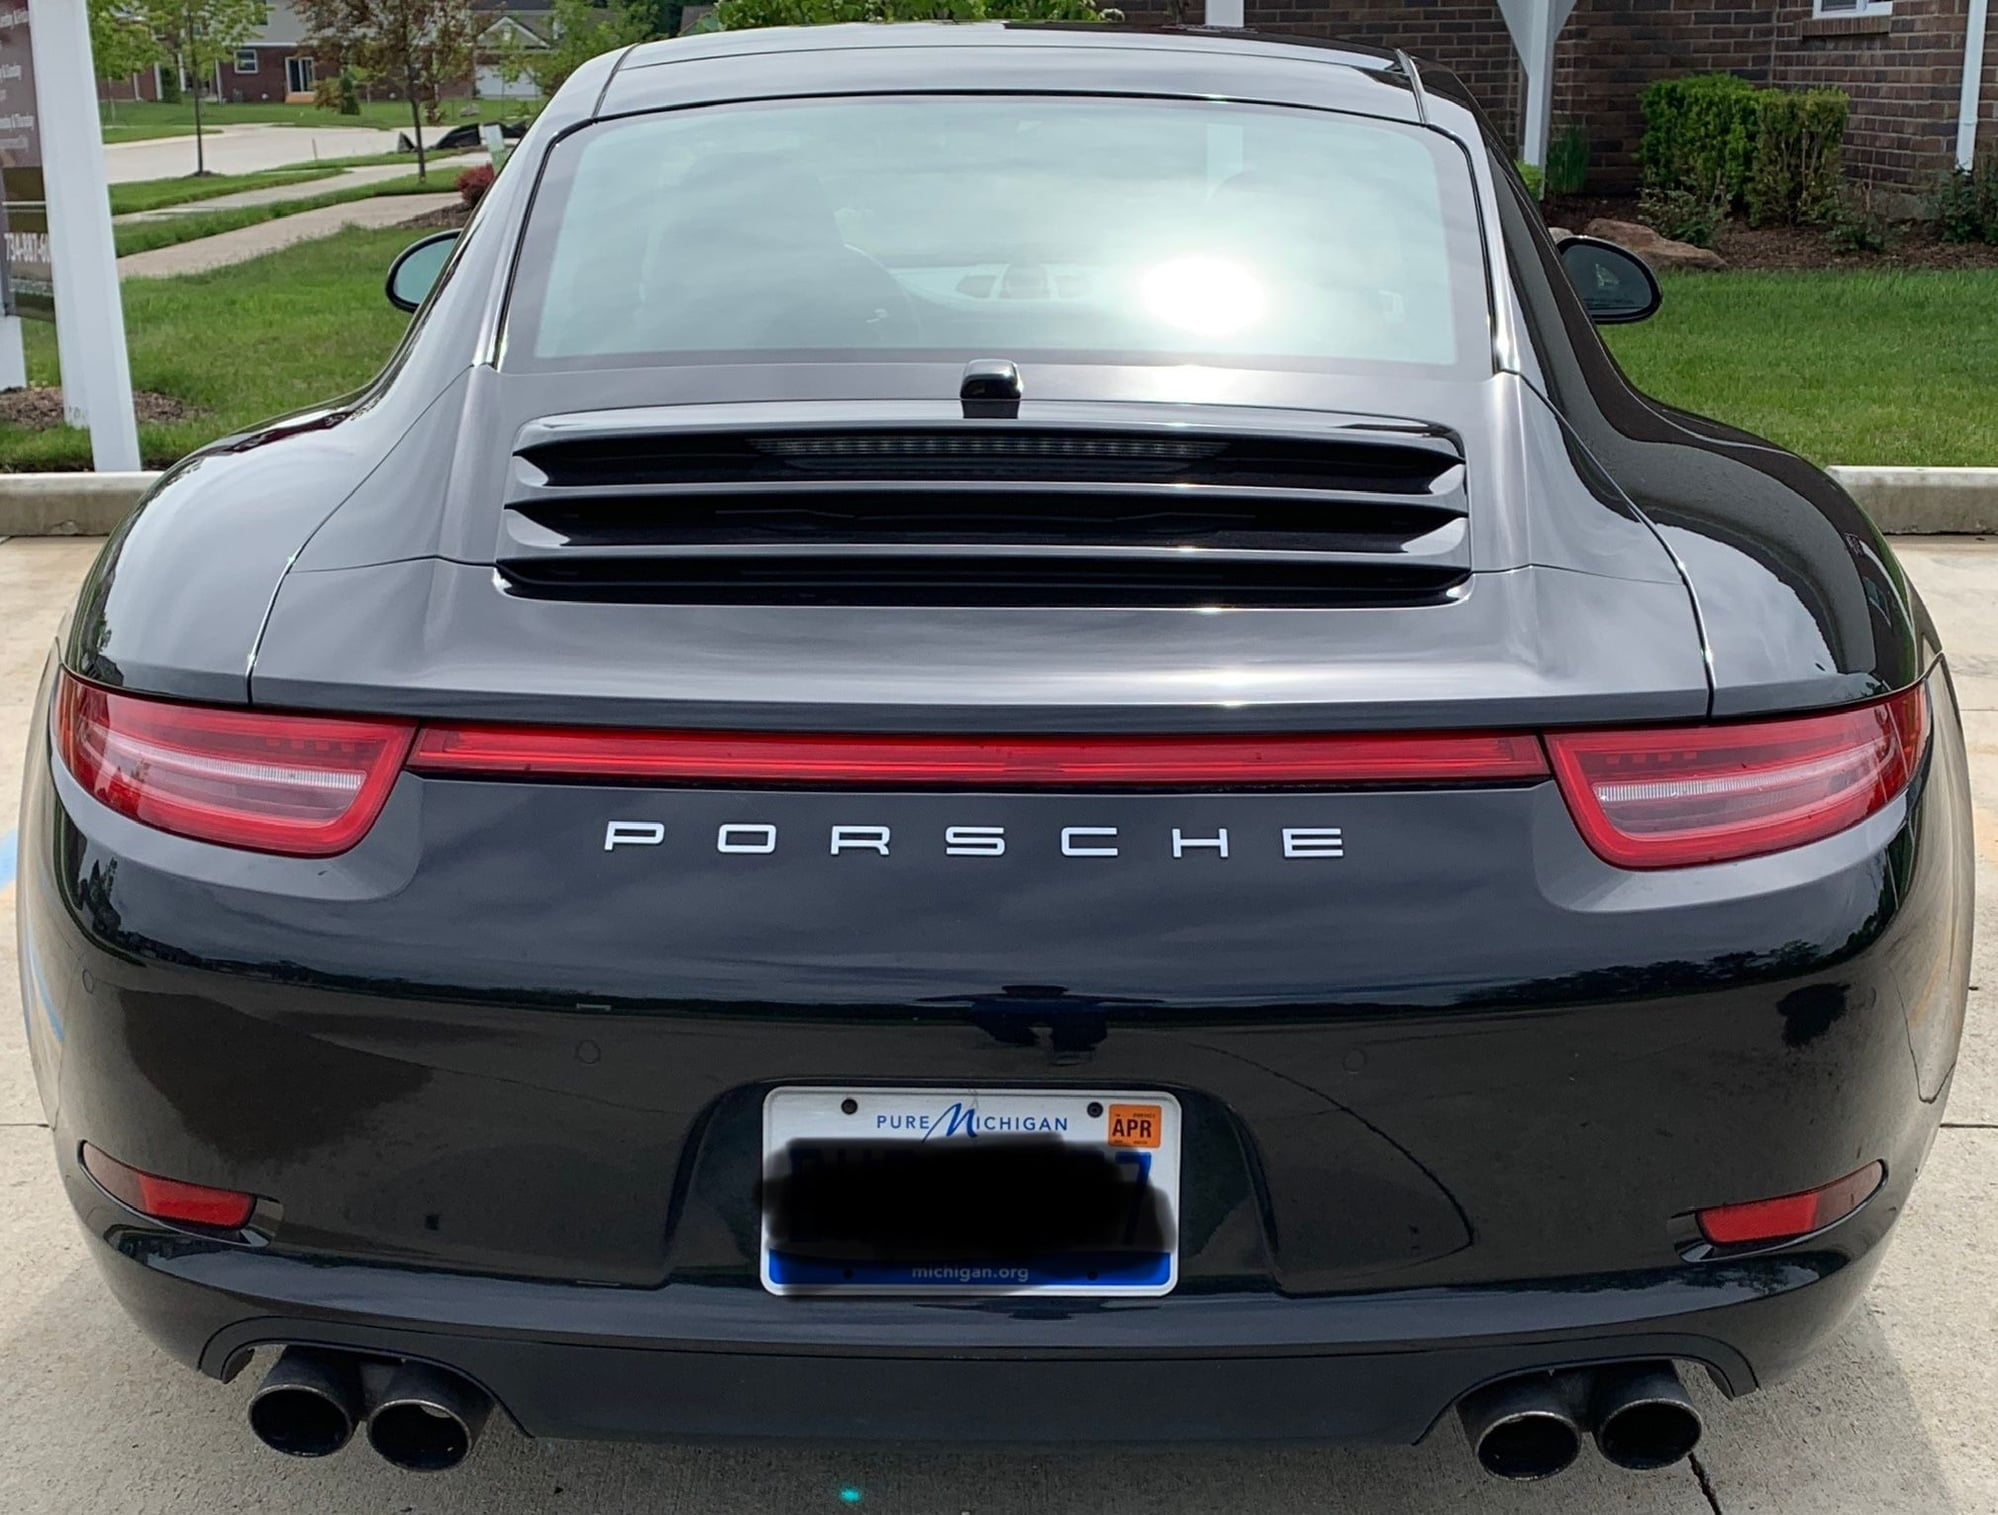 2014 Porsche 911 - 2014 911 C4S CPO until 2020 w/ PDK, Sport Chrono, Sport Exhaust, MSRP $132,340 - Used - VIN WP0AB2A91ES121753 - 22,000 Miles - 6 cyl - AWD - Automatic - Coupe - Black - Canton, MI 48187, United States